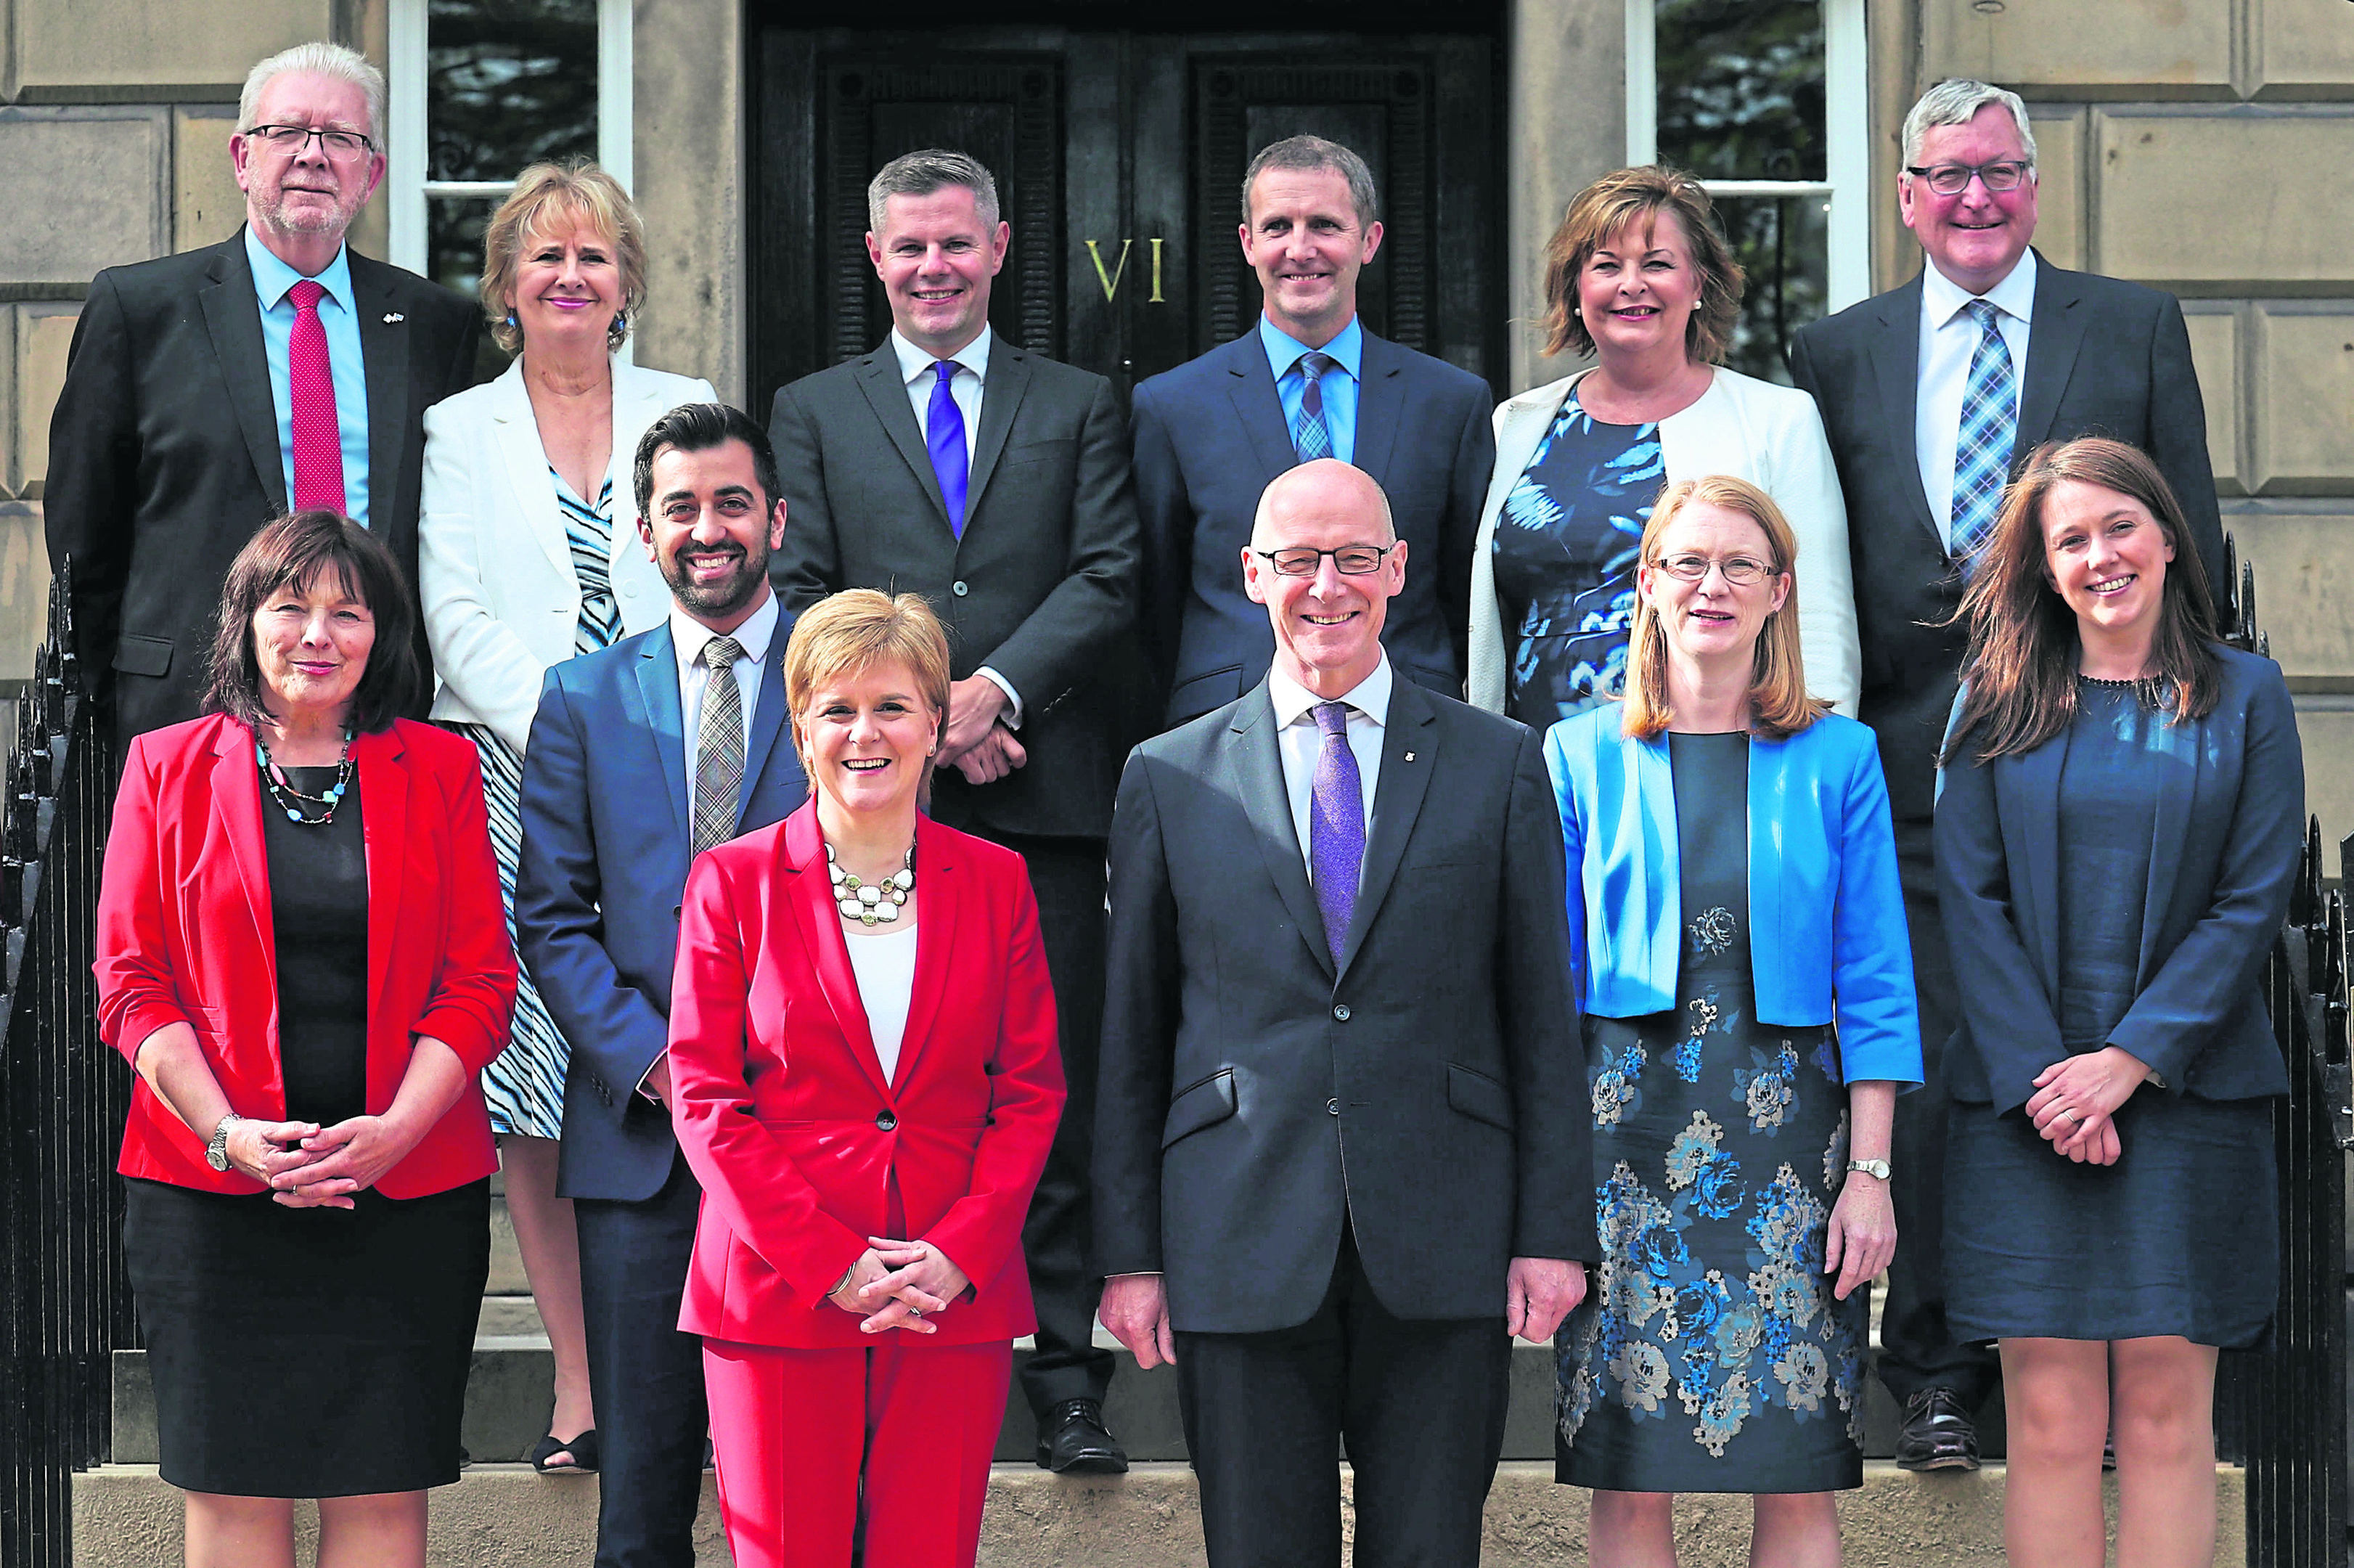 First Minister Nicola Sturgeon and Deputy First Minister John Swinney, centre right, with, back row, from left, Mike Russell, Roseanna Cunningham, Derek Mackay, Michael Matheson, Fiona Hyslop, Fergus Ewing, centre row, from left, Jeane Freeman, Humza Yousaf, Shirley-Anne Somerville and Aileen Campbell